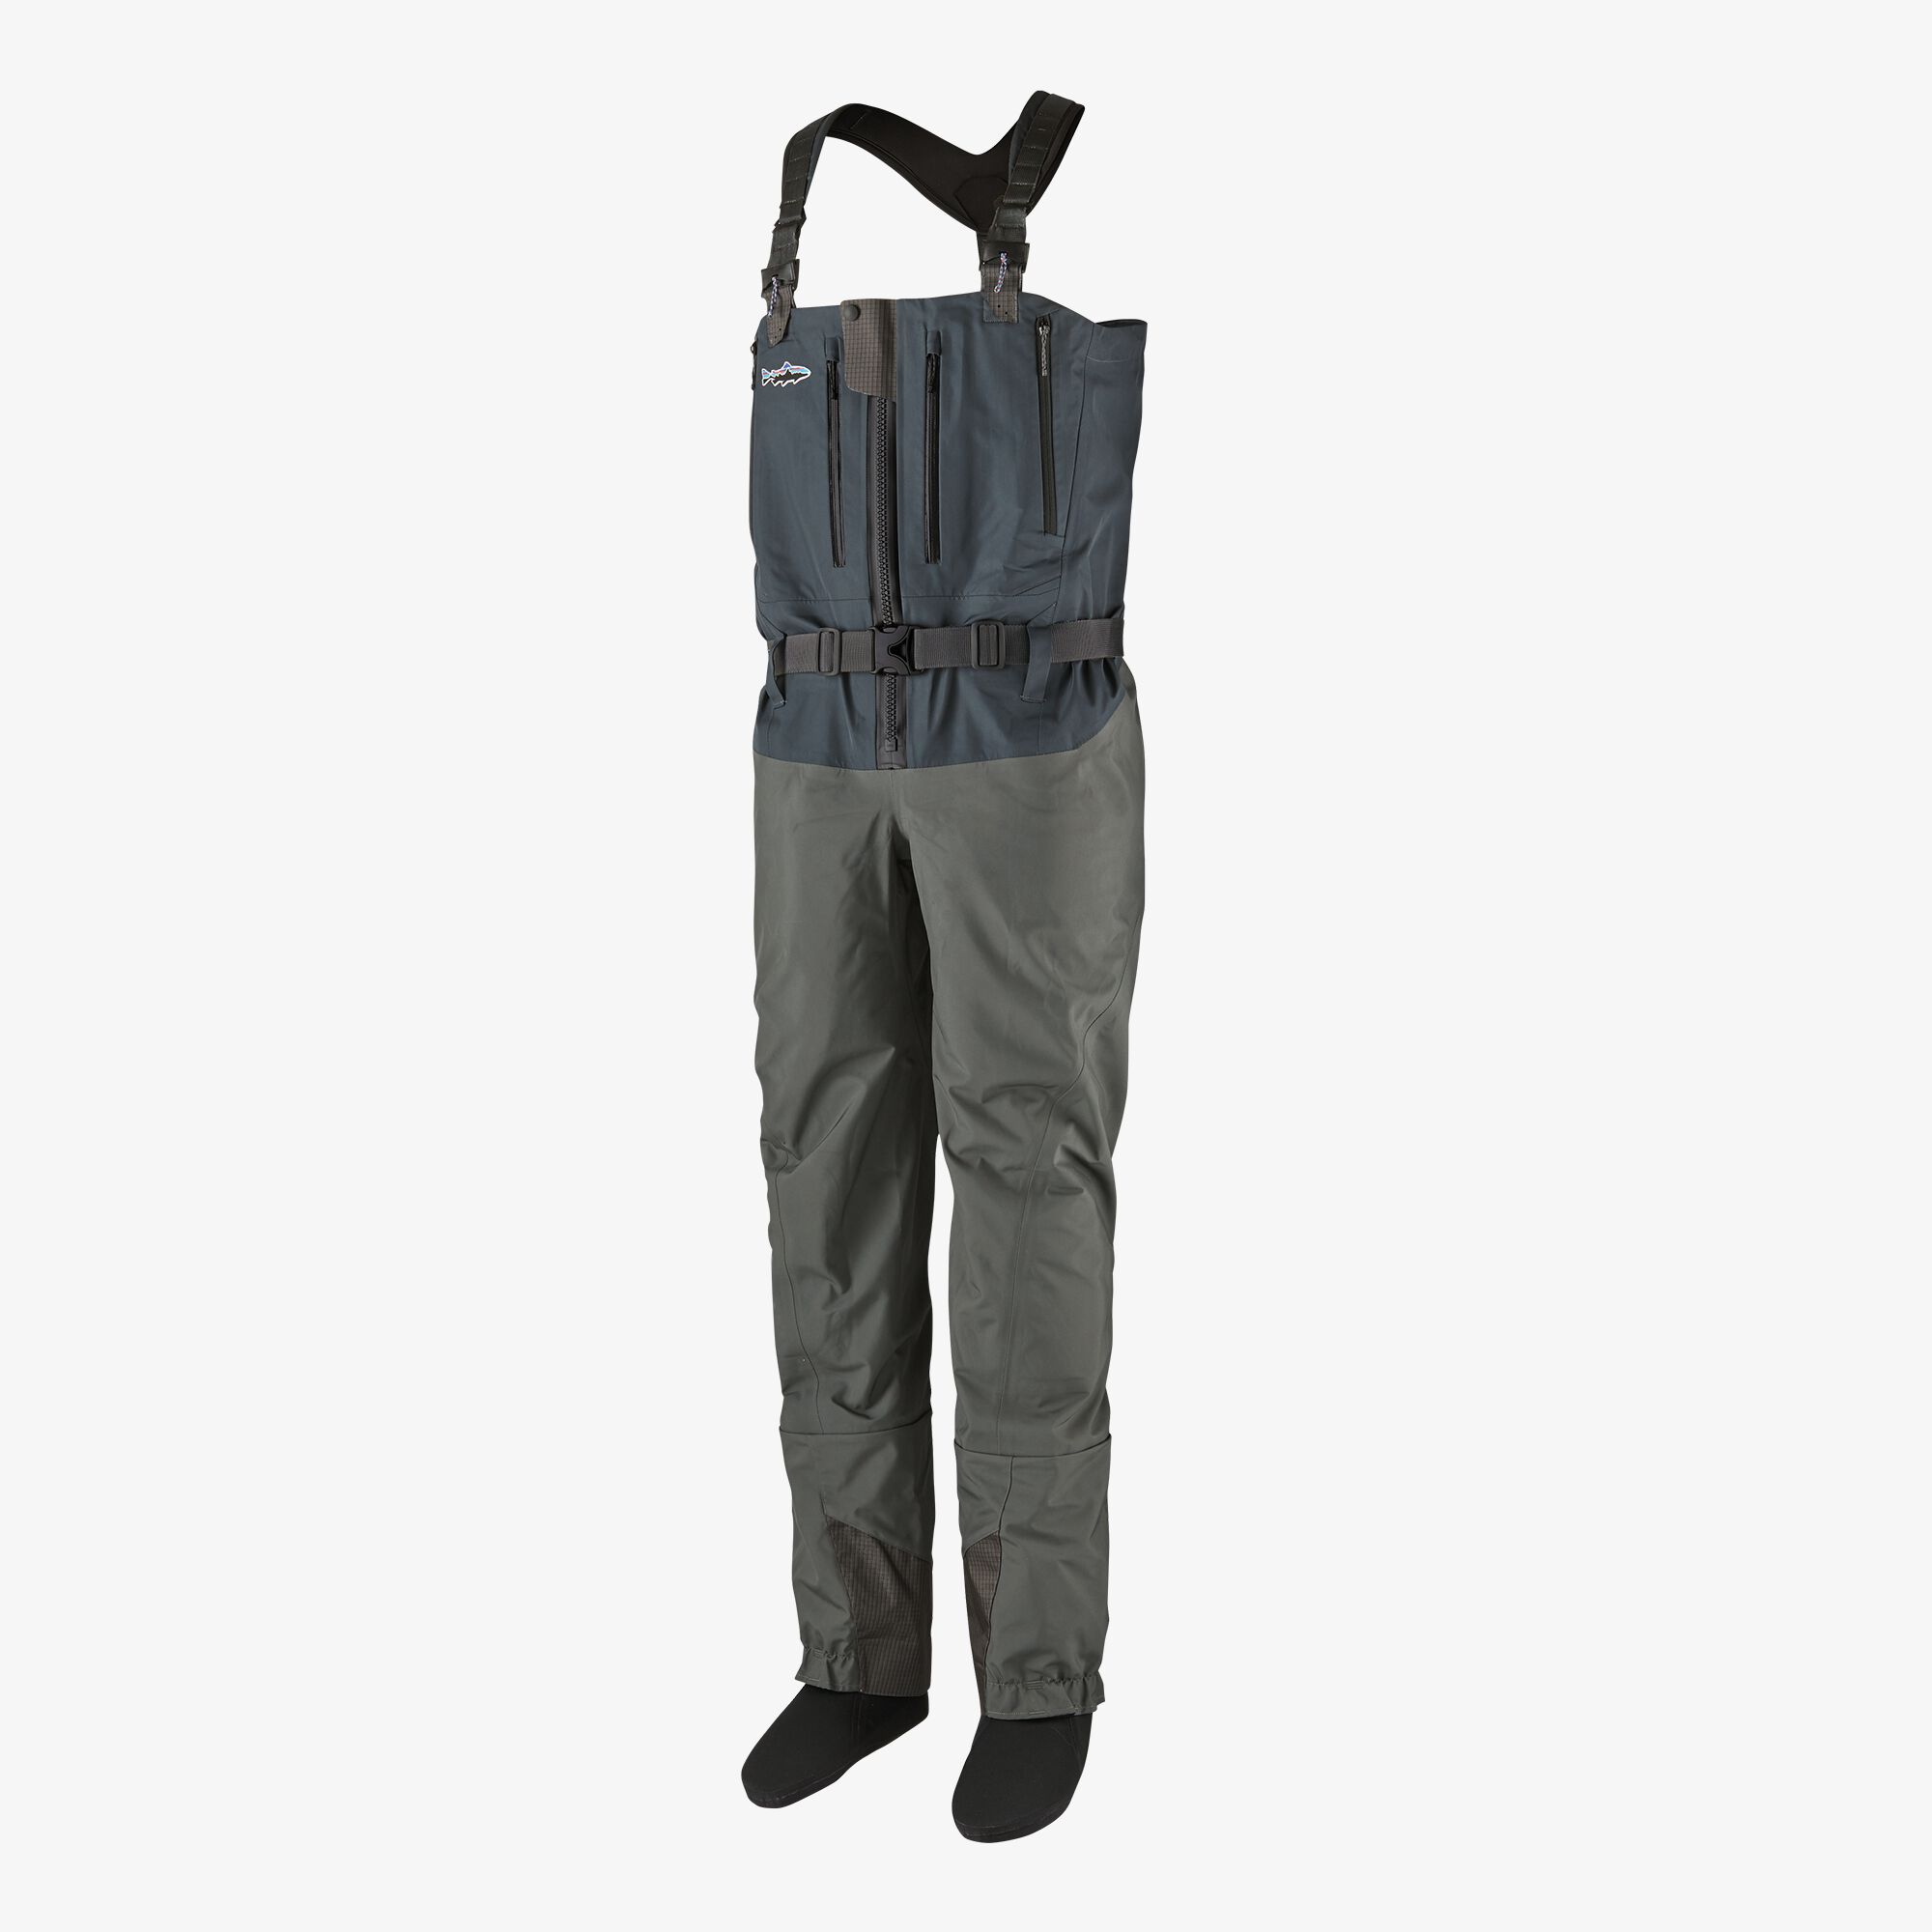 PATAGONIA SWIFTCURRENT EXPEDITION ZIP-FRONT WADER - 3LL (EXTENDED SIZES)